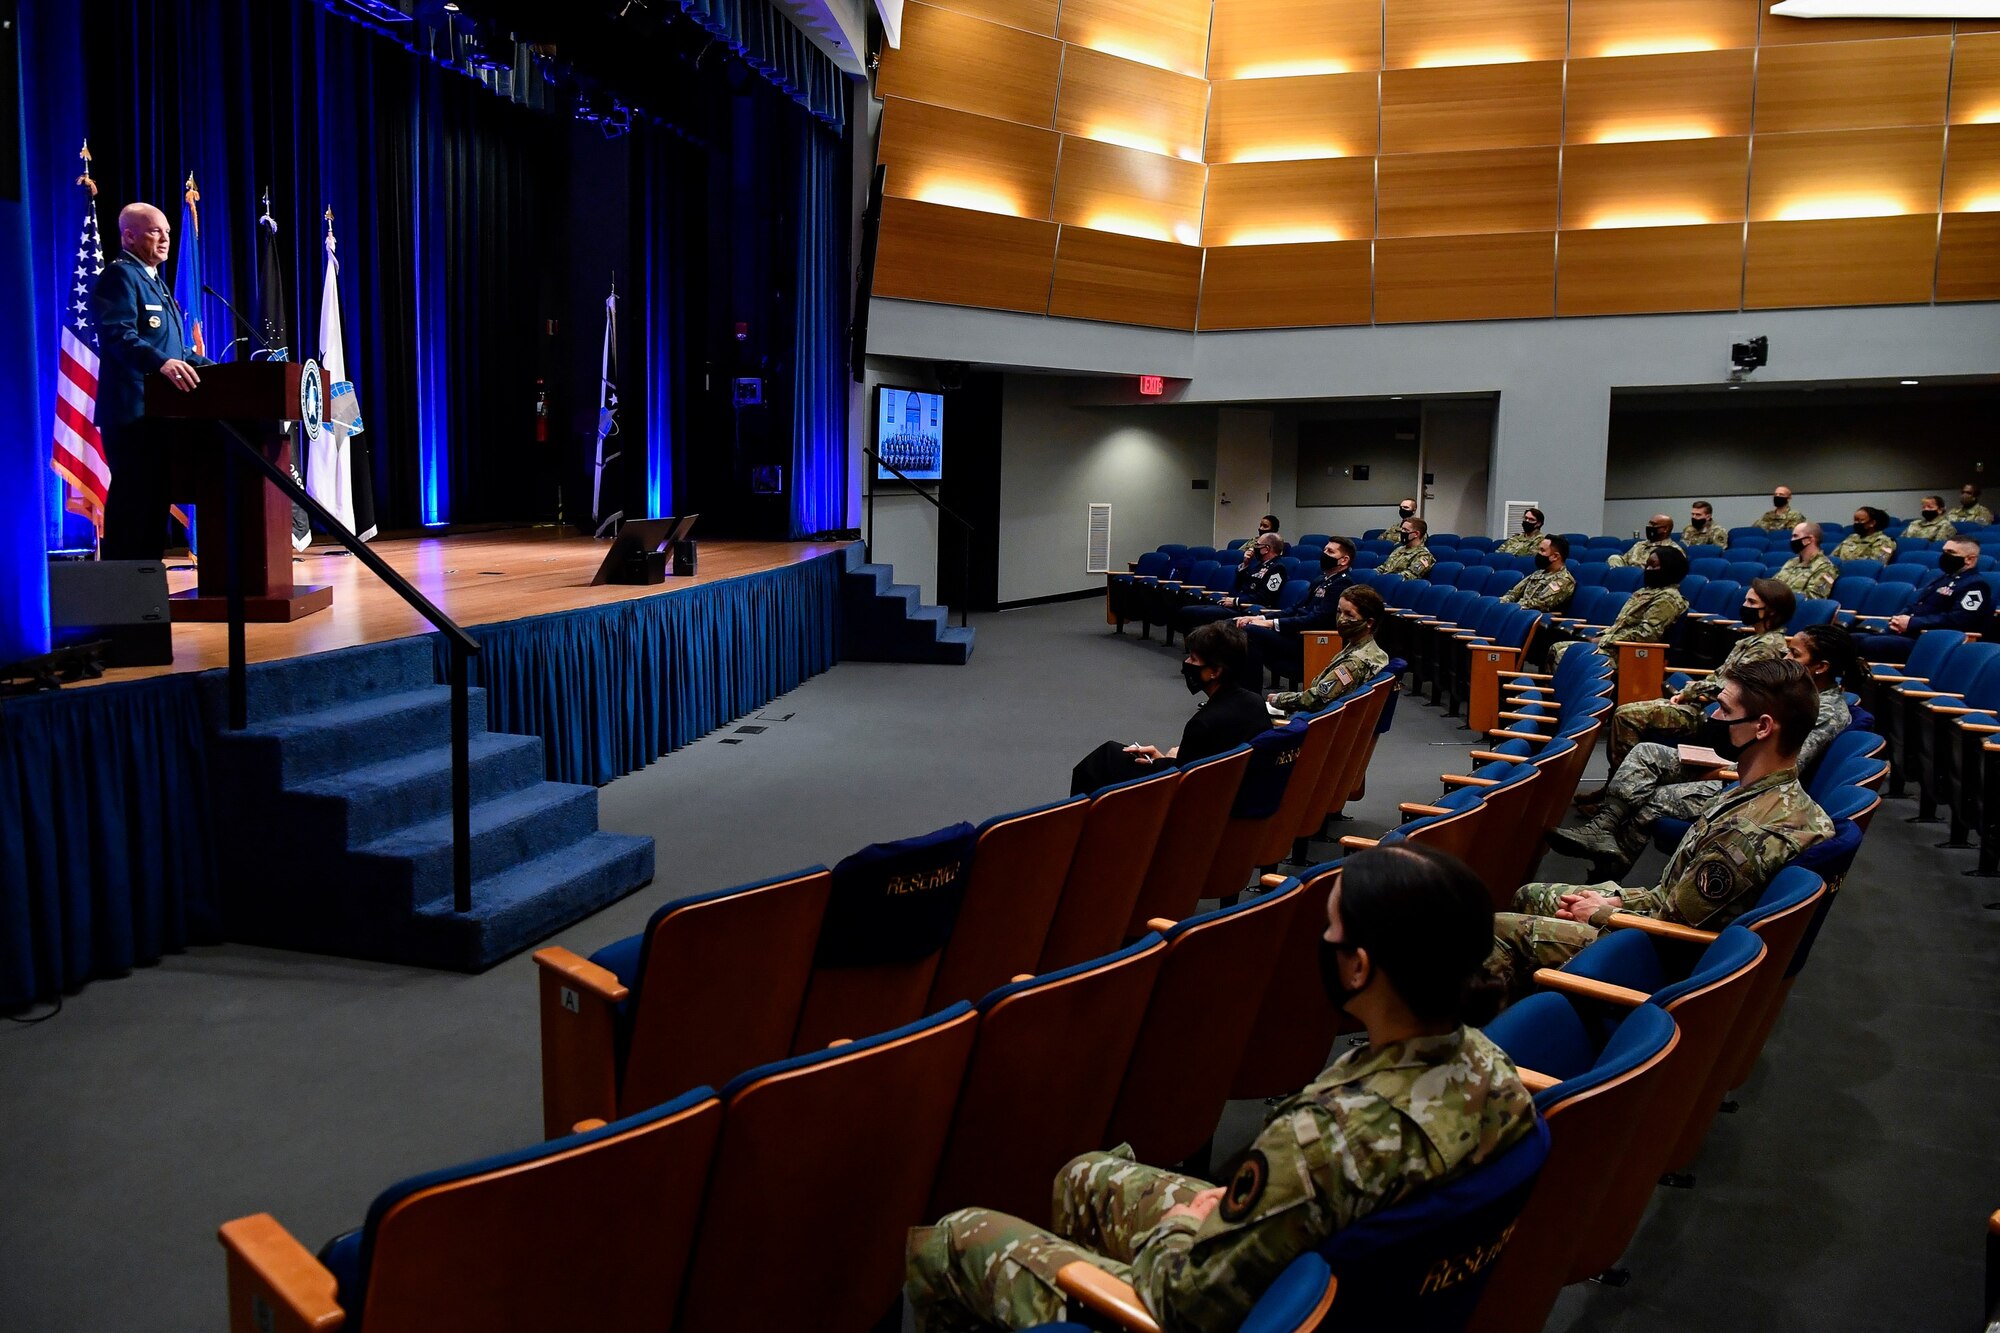 Chief of Space Operations Gen. John W. Raymond delivers remarks during a ceremony at the Pentagon transferring airmen into the U.S. Space Force, Arlington, Va., Sept. 15, 2020. About 300 airmen at bases worldwide, including 22 in the audience, transferred during the ceremony.